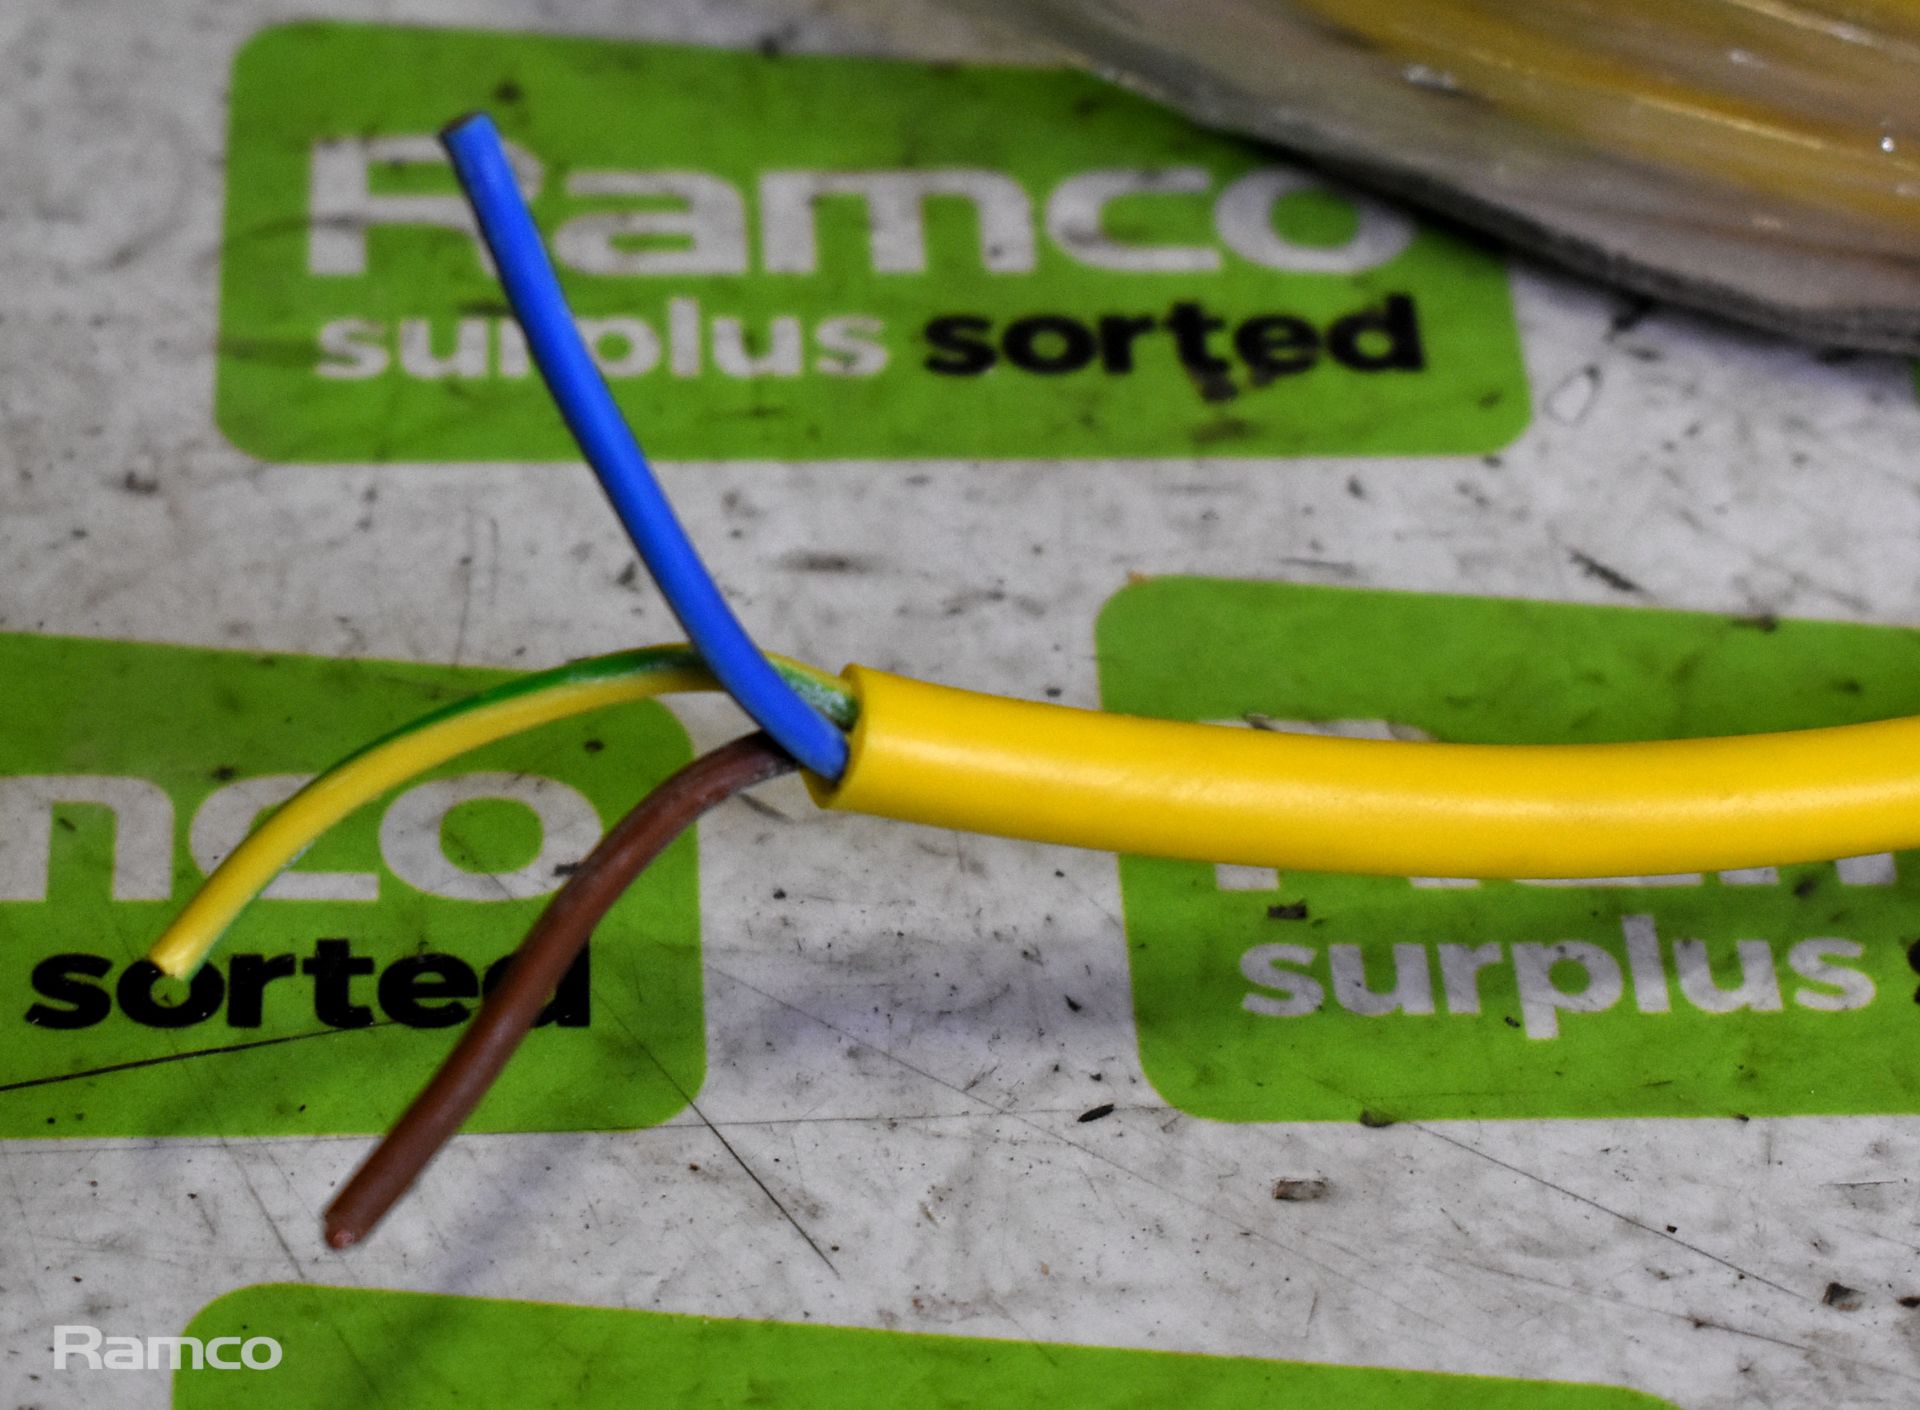 1x Roll of 1.5mm yellow flex cable - 100m approx. - Image 2 of 3